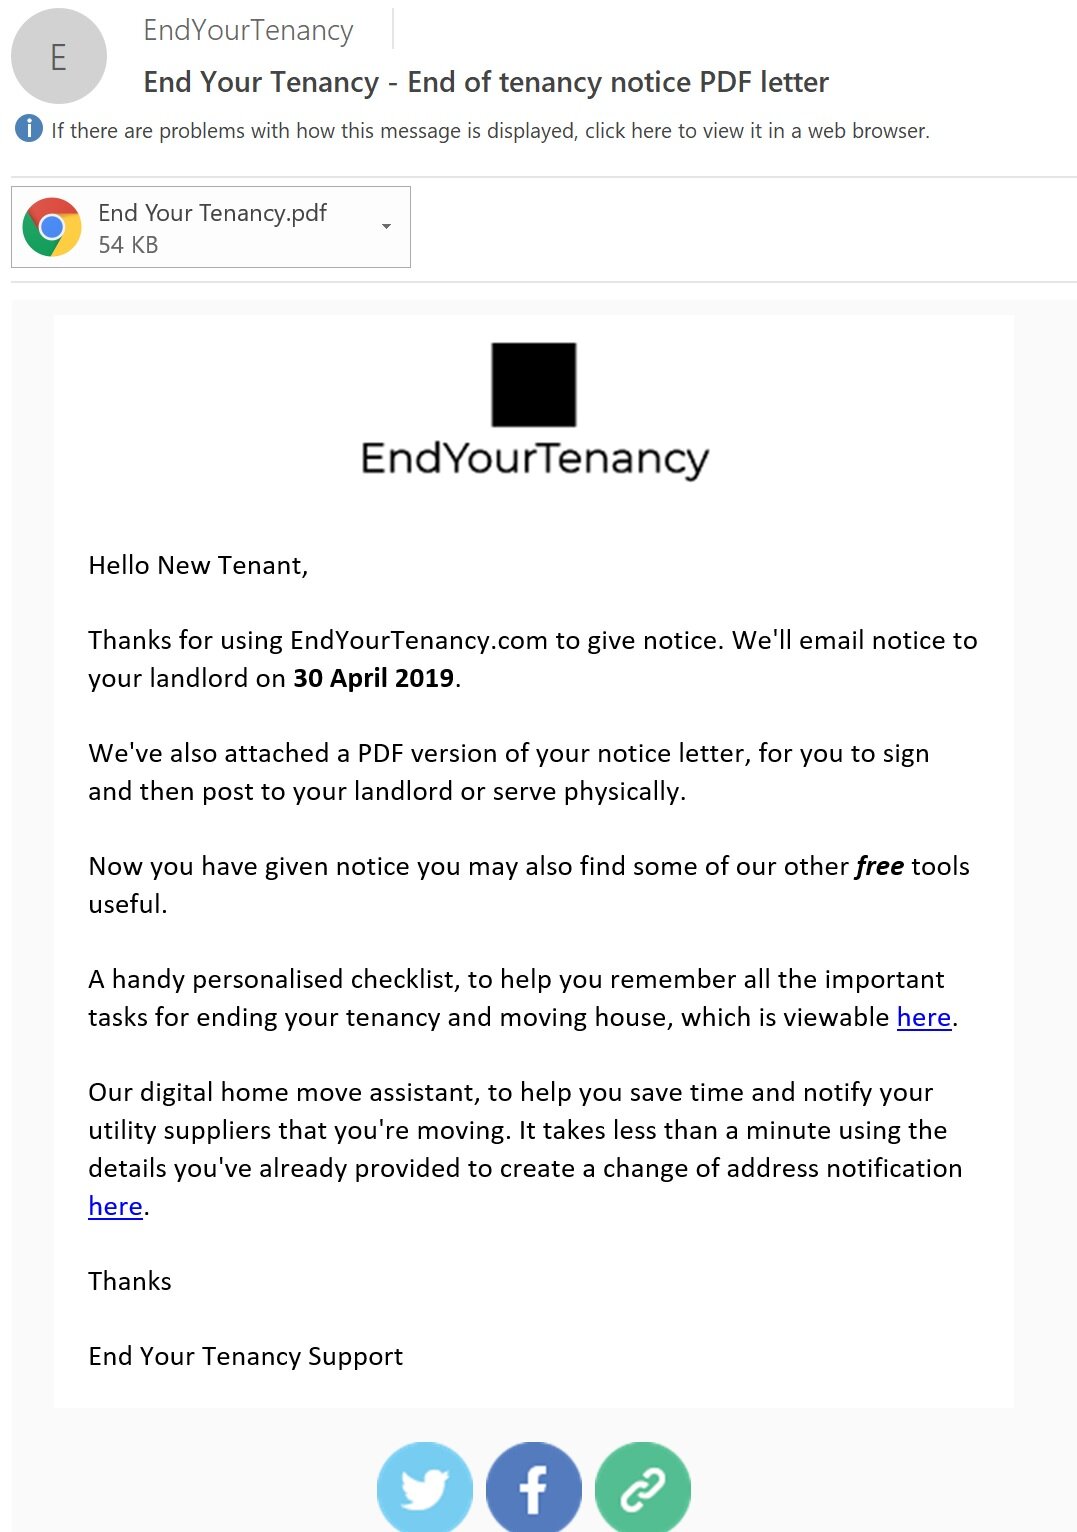 End of tenancy notice letter generator explained — End Your Tenancy